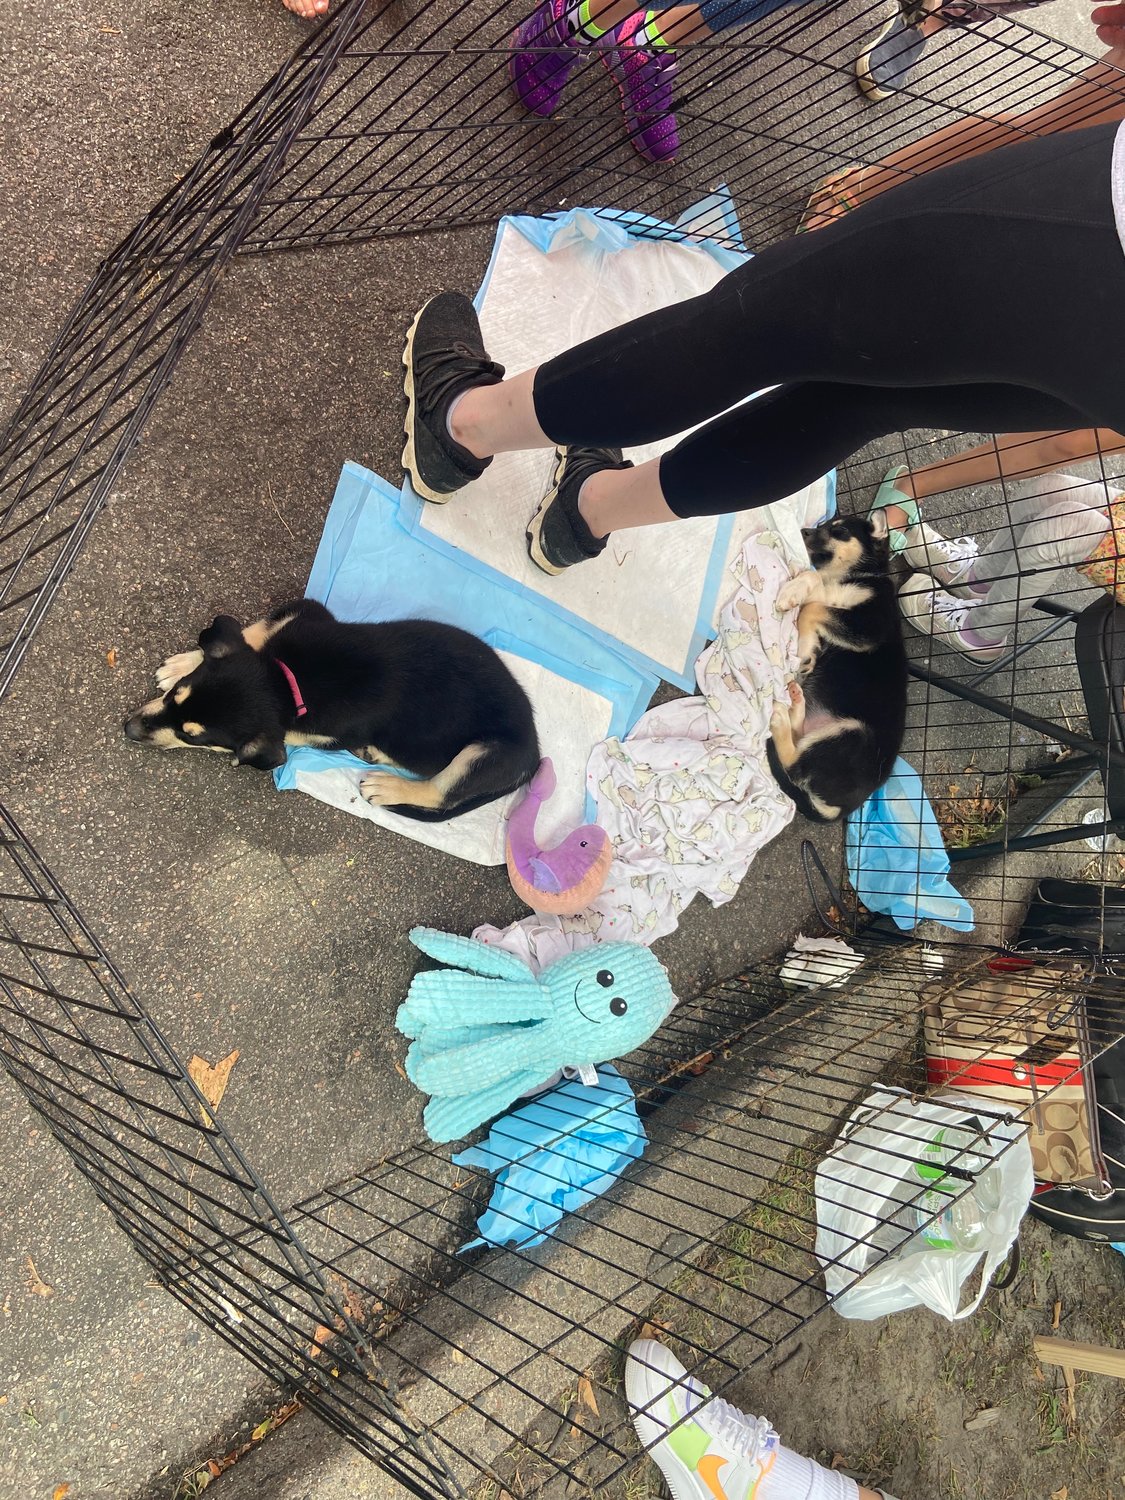 These unnamed puppies were just some of many dogs available for adoption at Woofstock on Saturday September 10, 2022 hosted at Sheridan Ave S & W 43rd St.